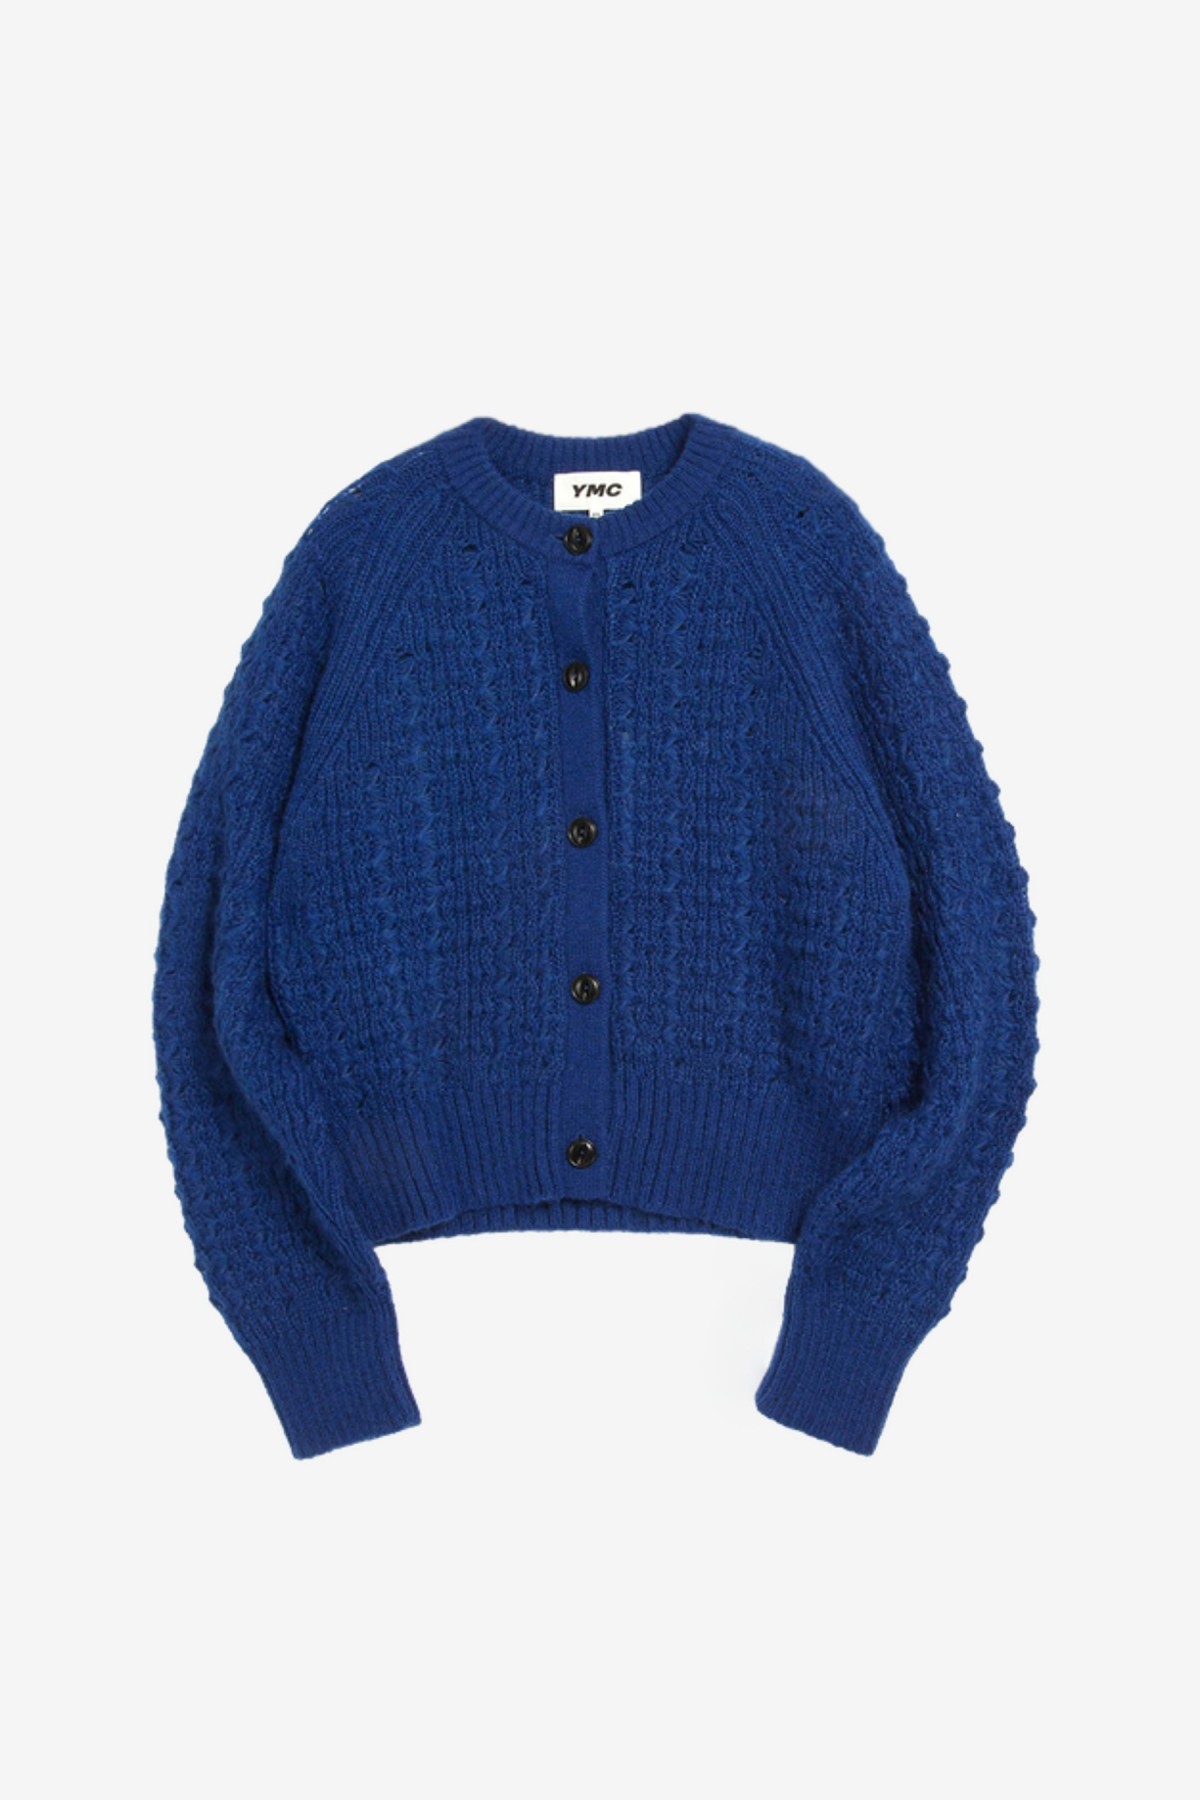 YMC You Must Create Foxtail Cardigan in Blue